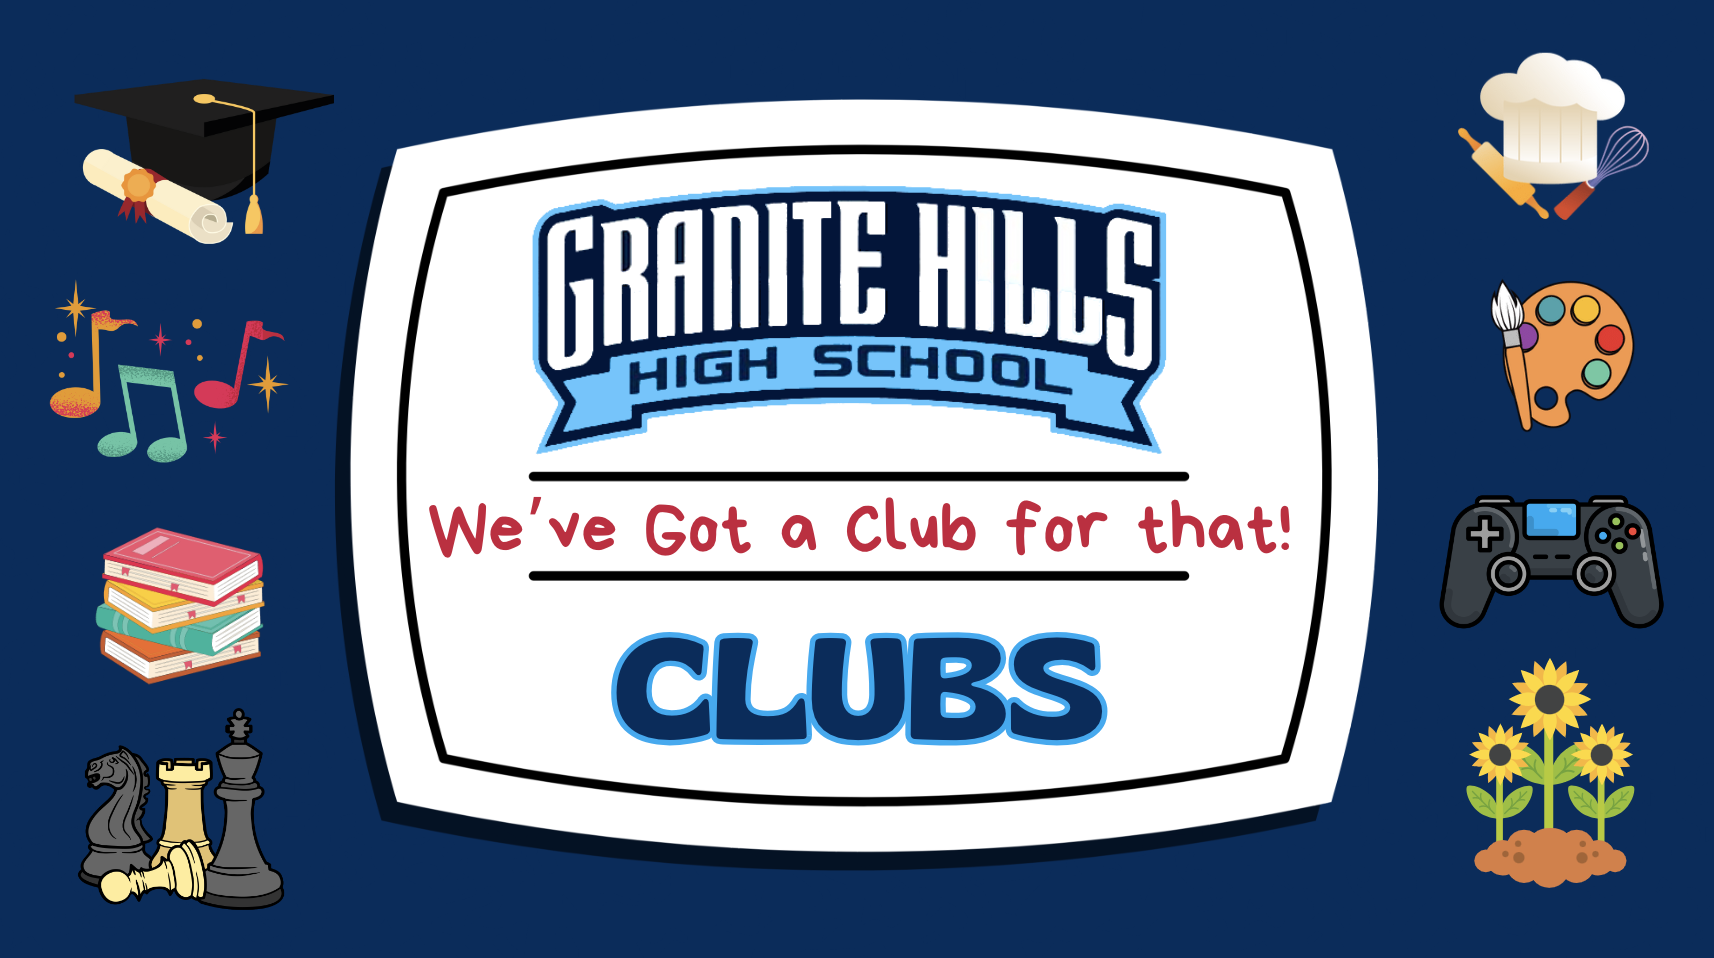 Granite Hills Clubs We've got a club for that!